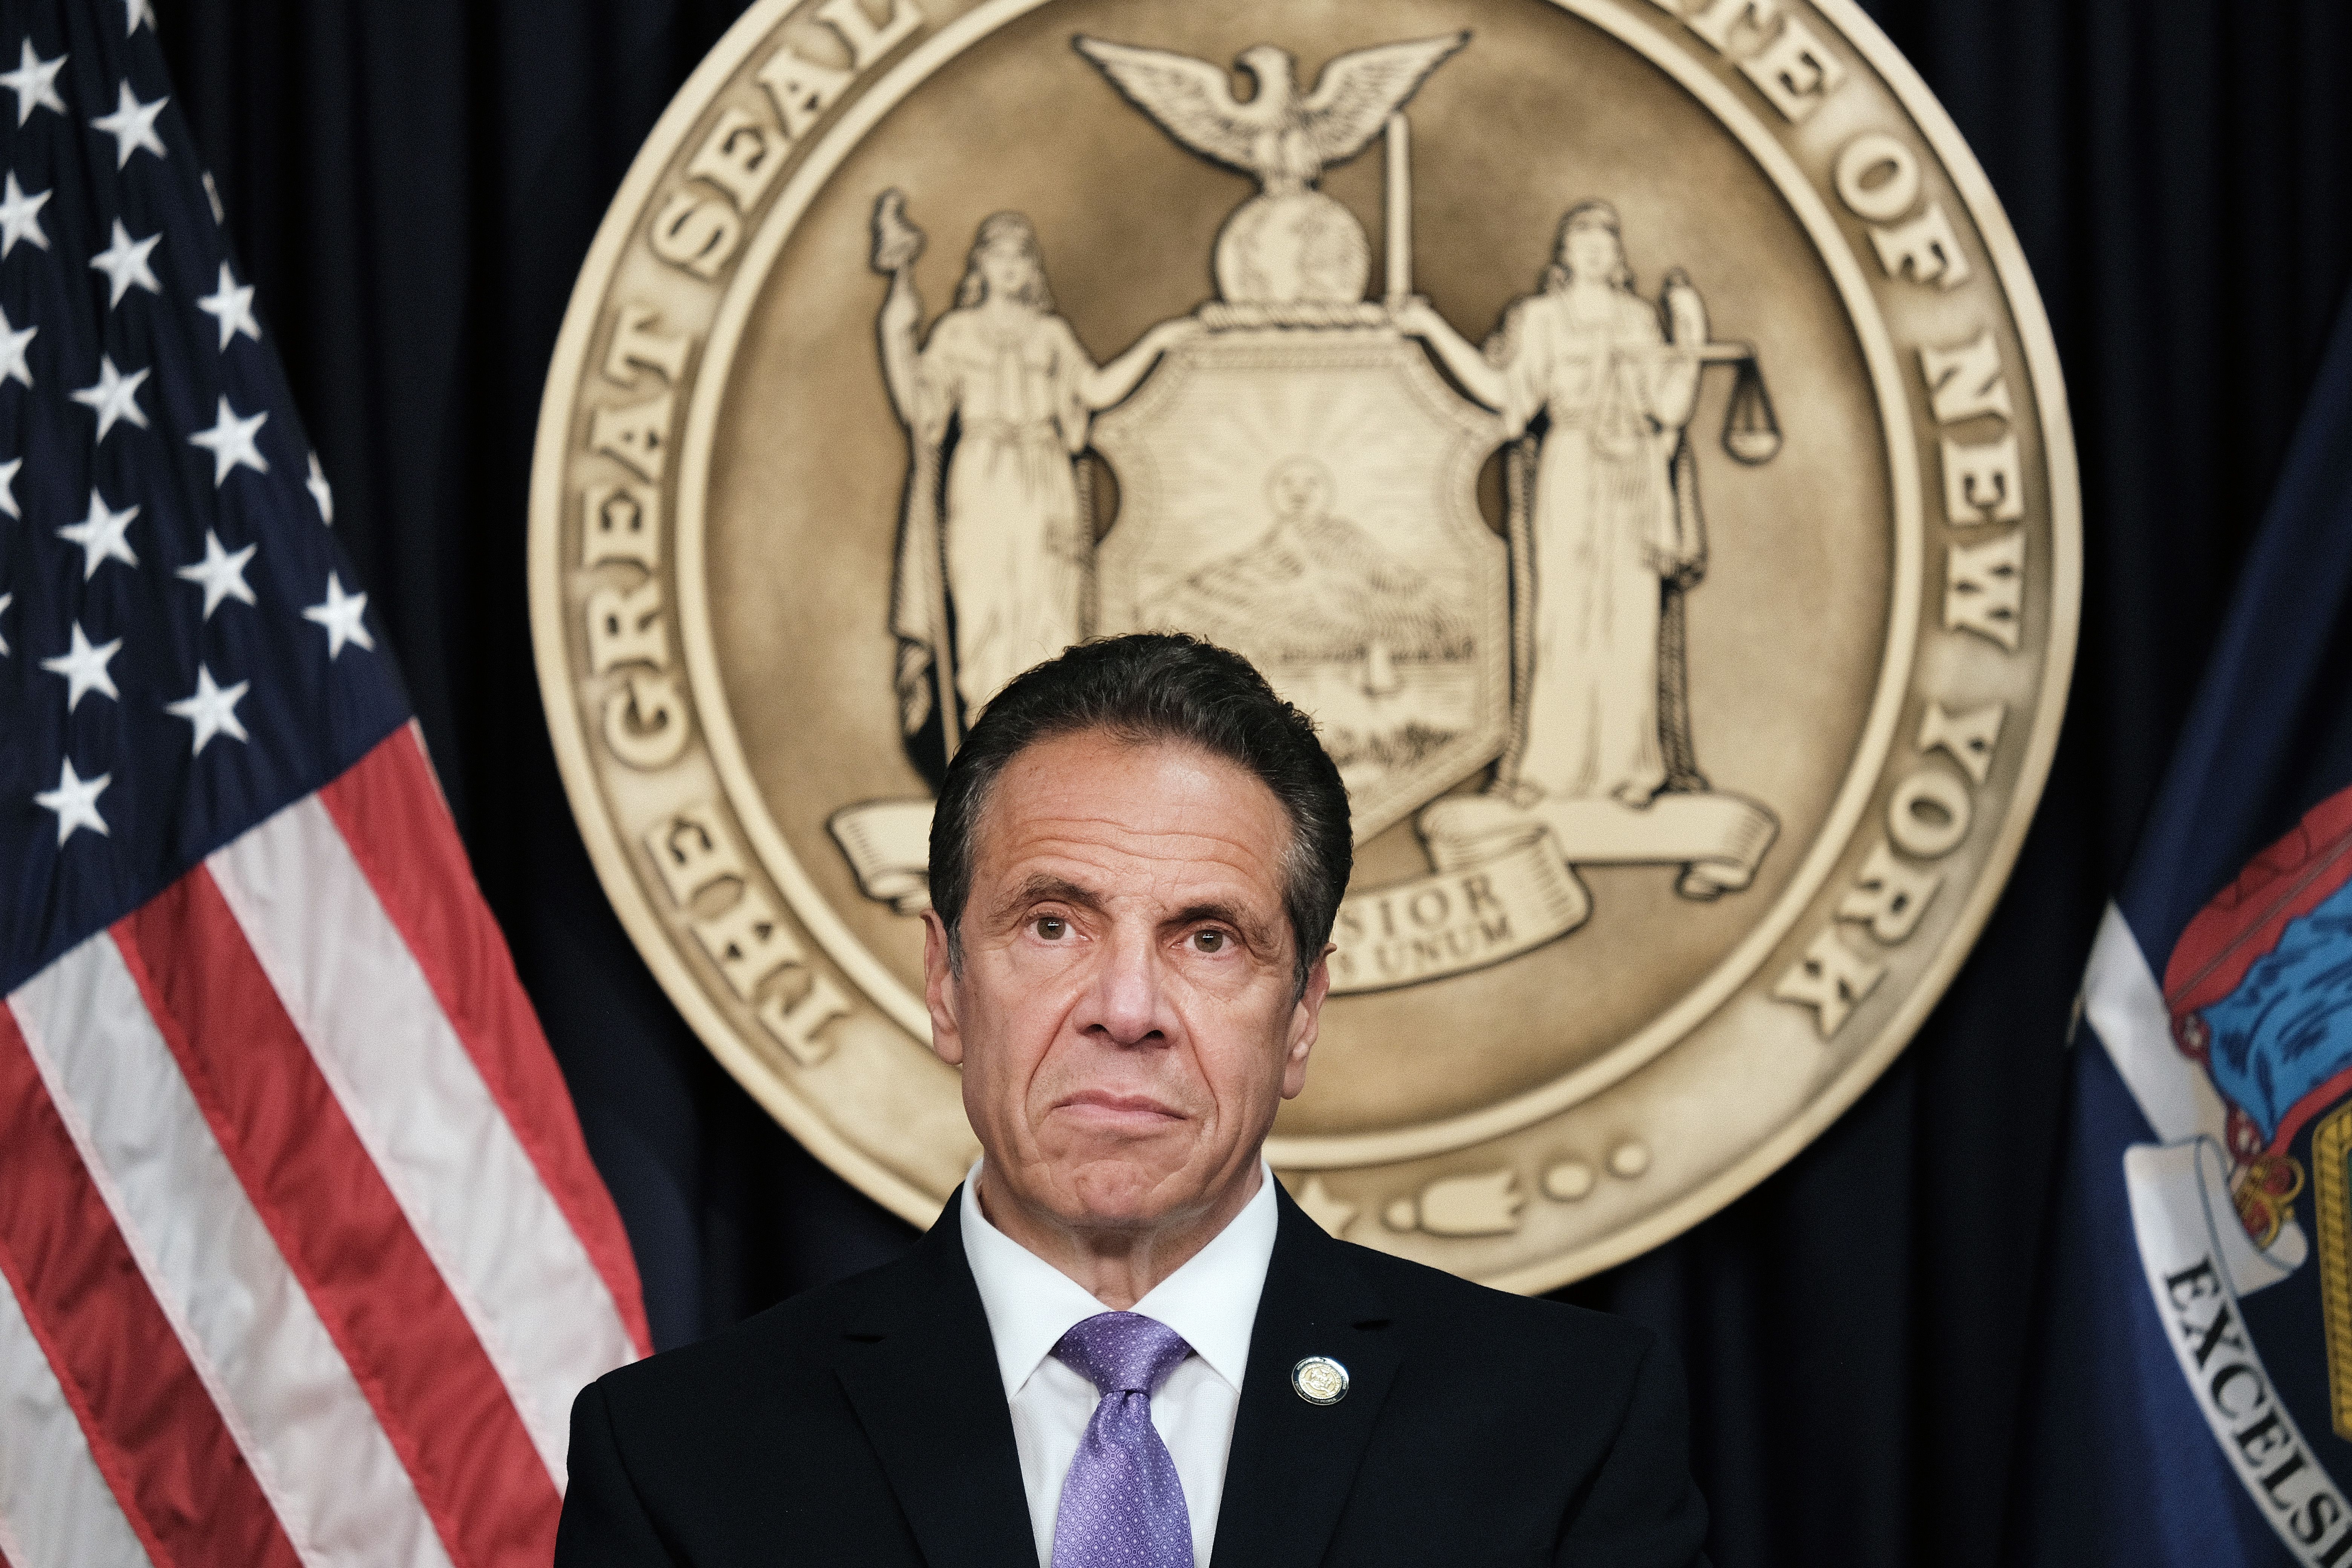 Andrew Cuomo appears at an event.